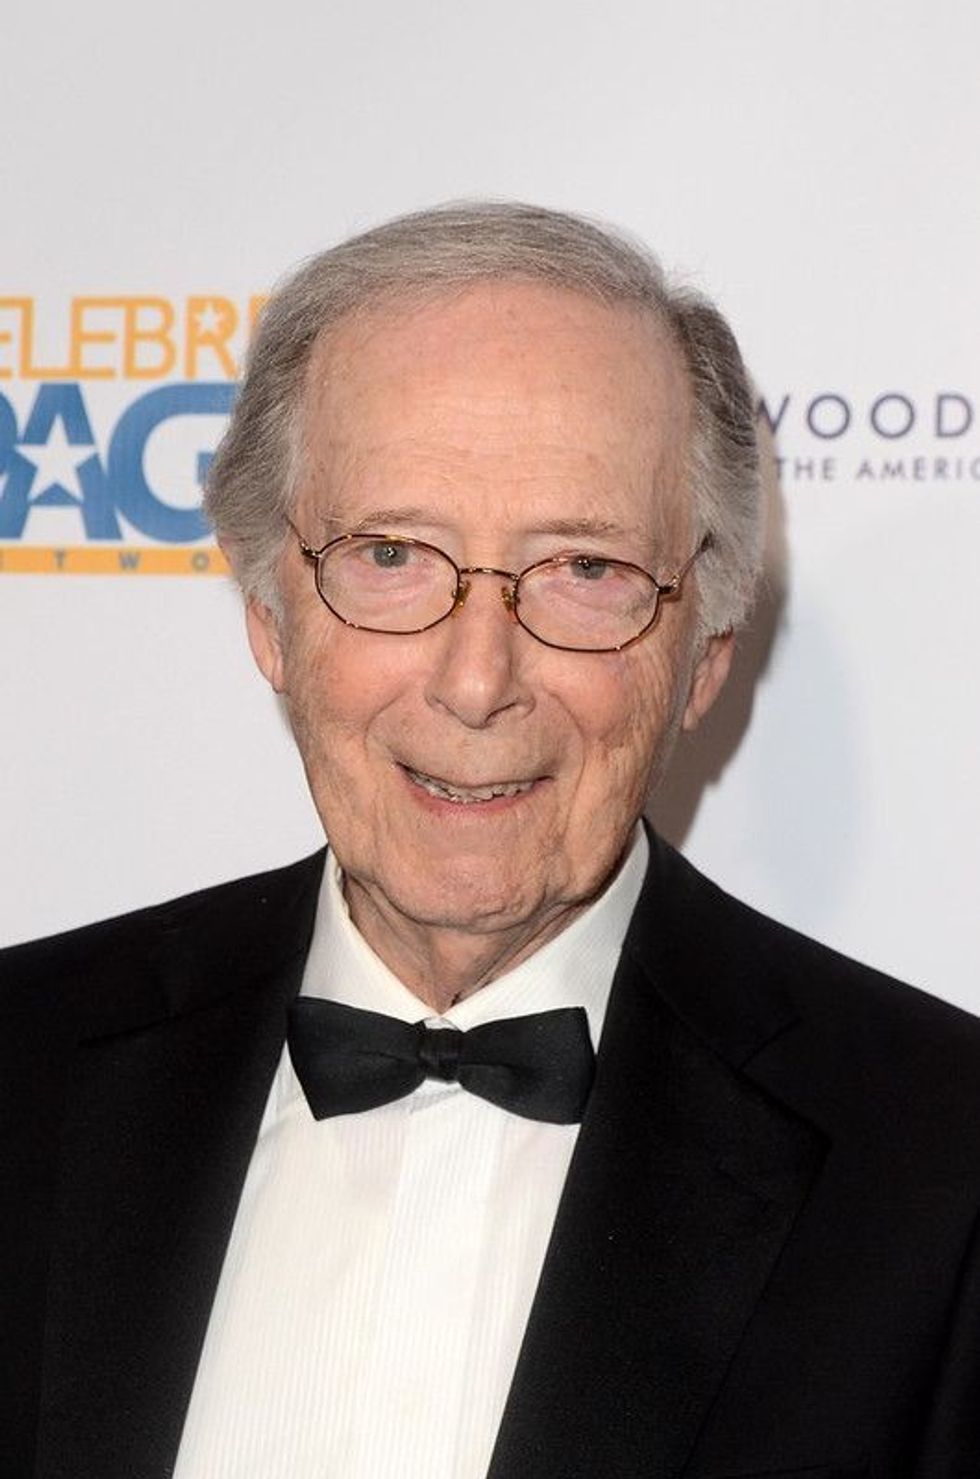 The American actor Bernie Kopell was born in Brooklyn, New York. Continue reading for more.